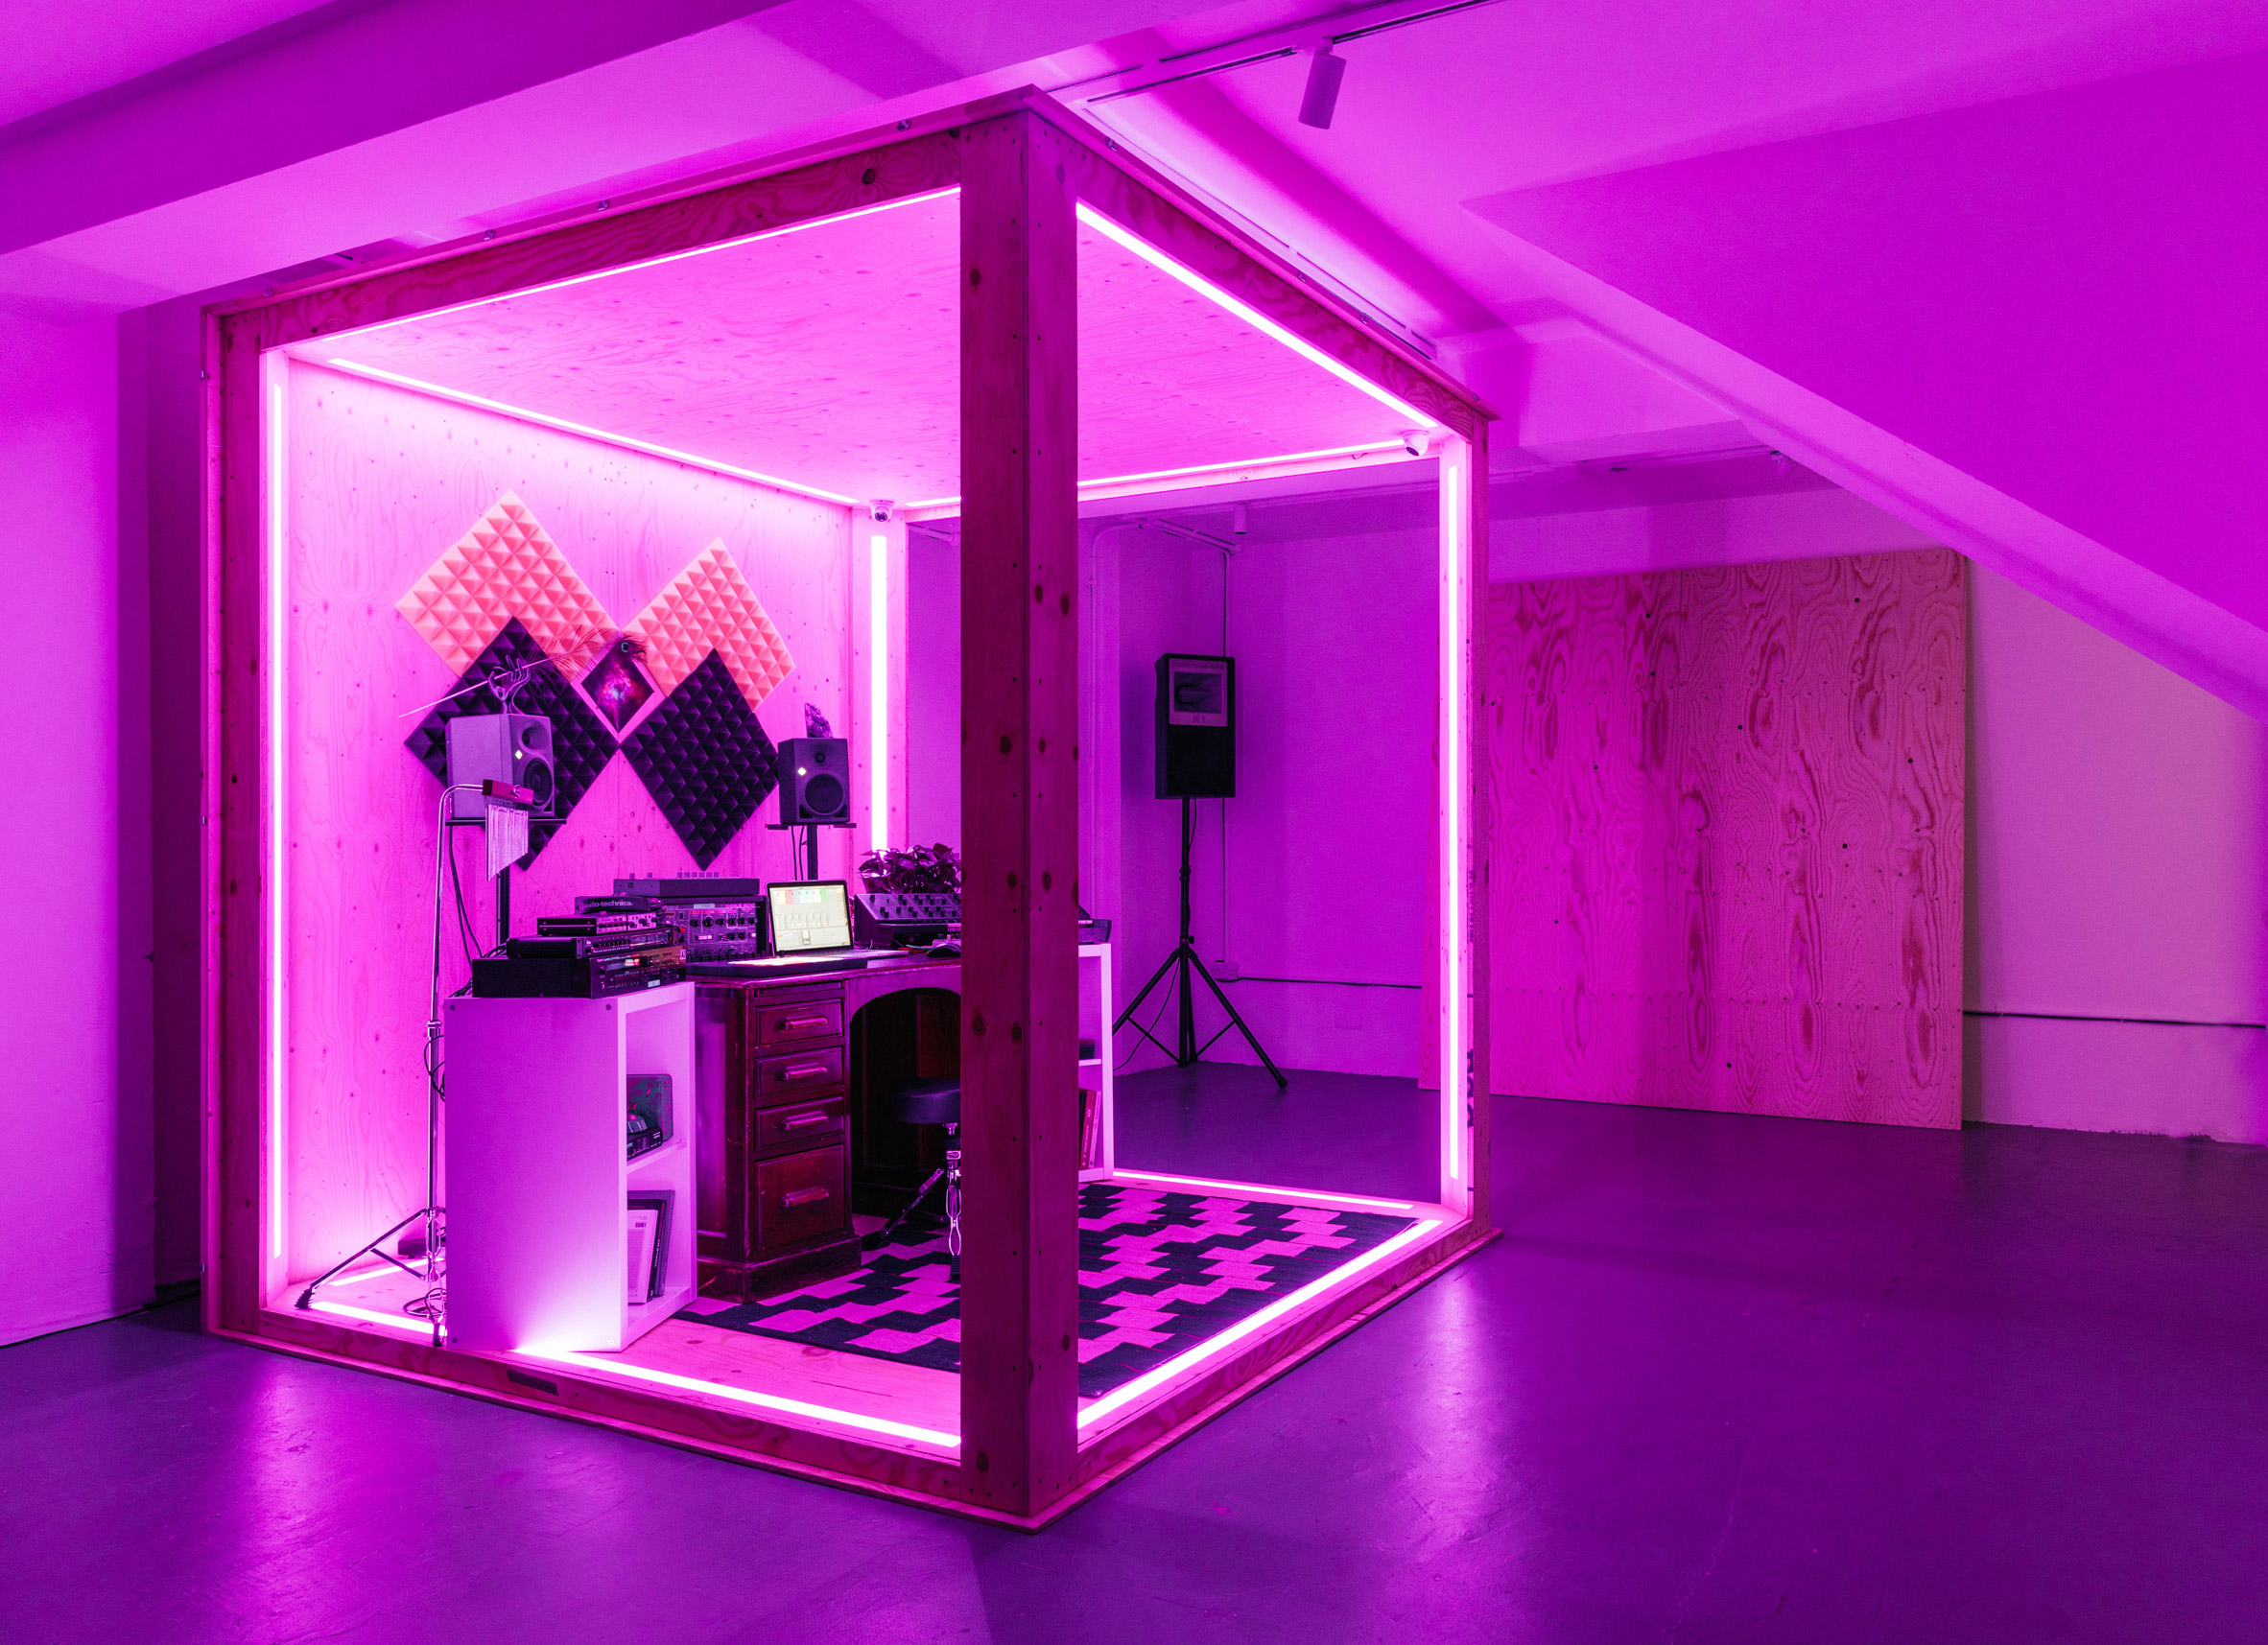 Made Thought opens pop-up shop that incorporates an exhibition space